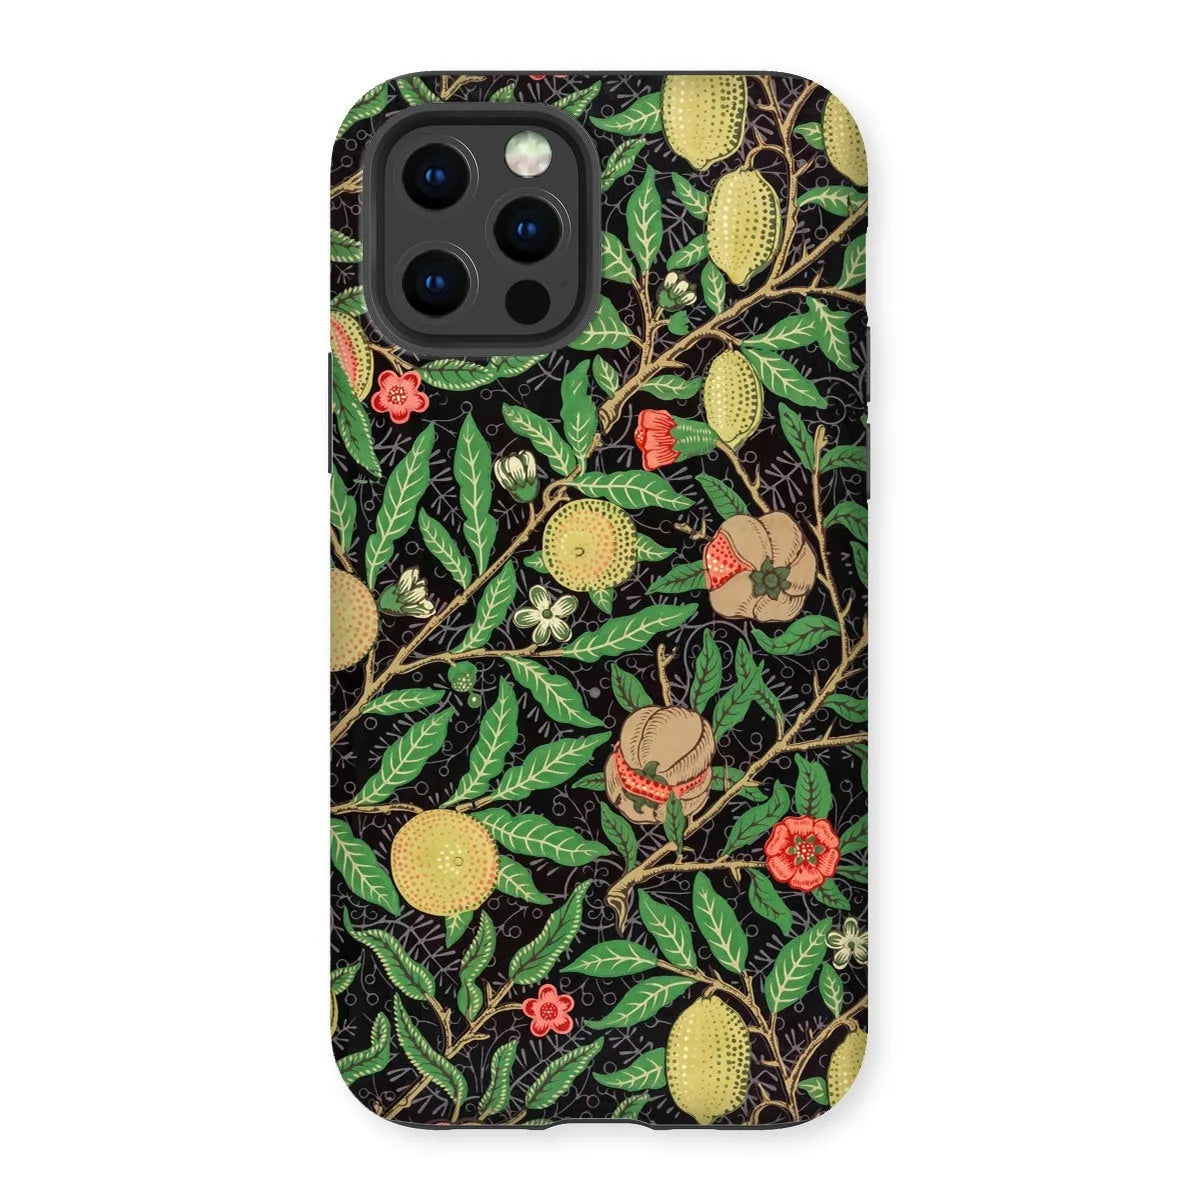 Four Fruits Too Aesthetic Pattern Phone Case - William Morris - Iphone 12 Pro / Matte - Mobile Phone Cases - Aesthetic